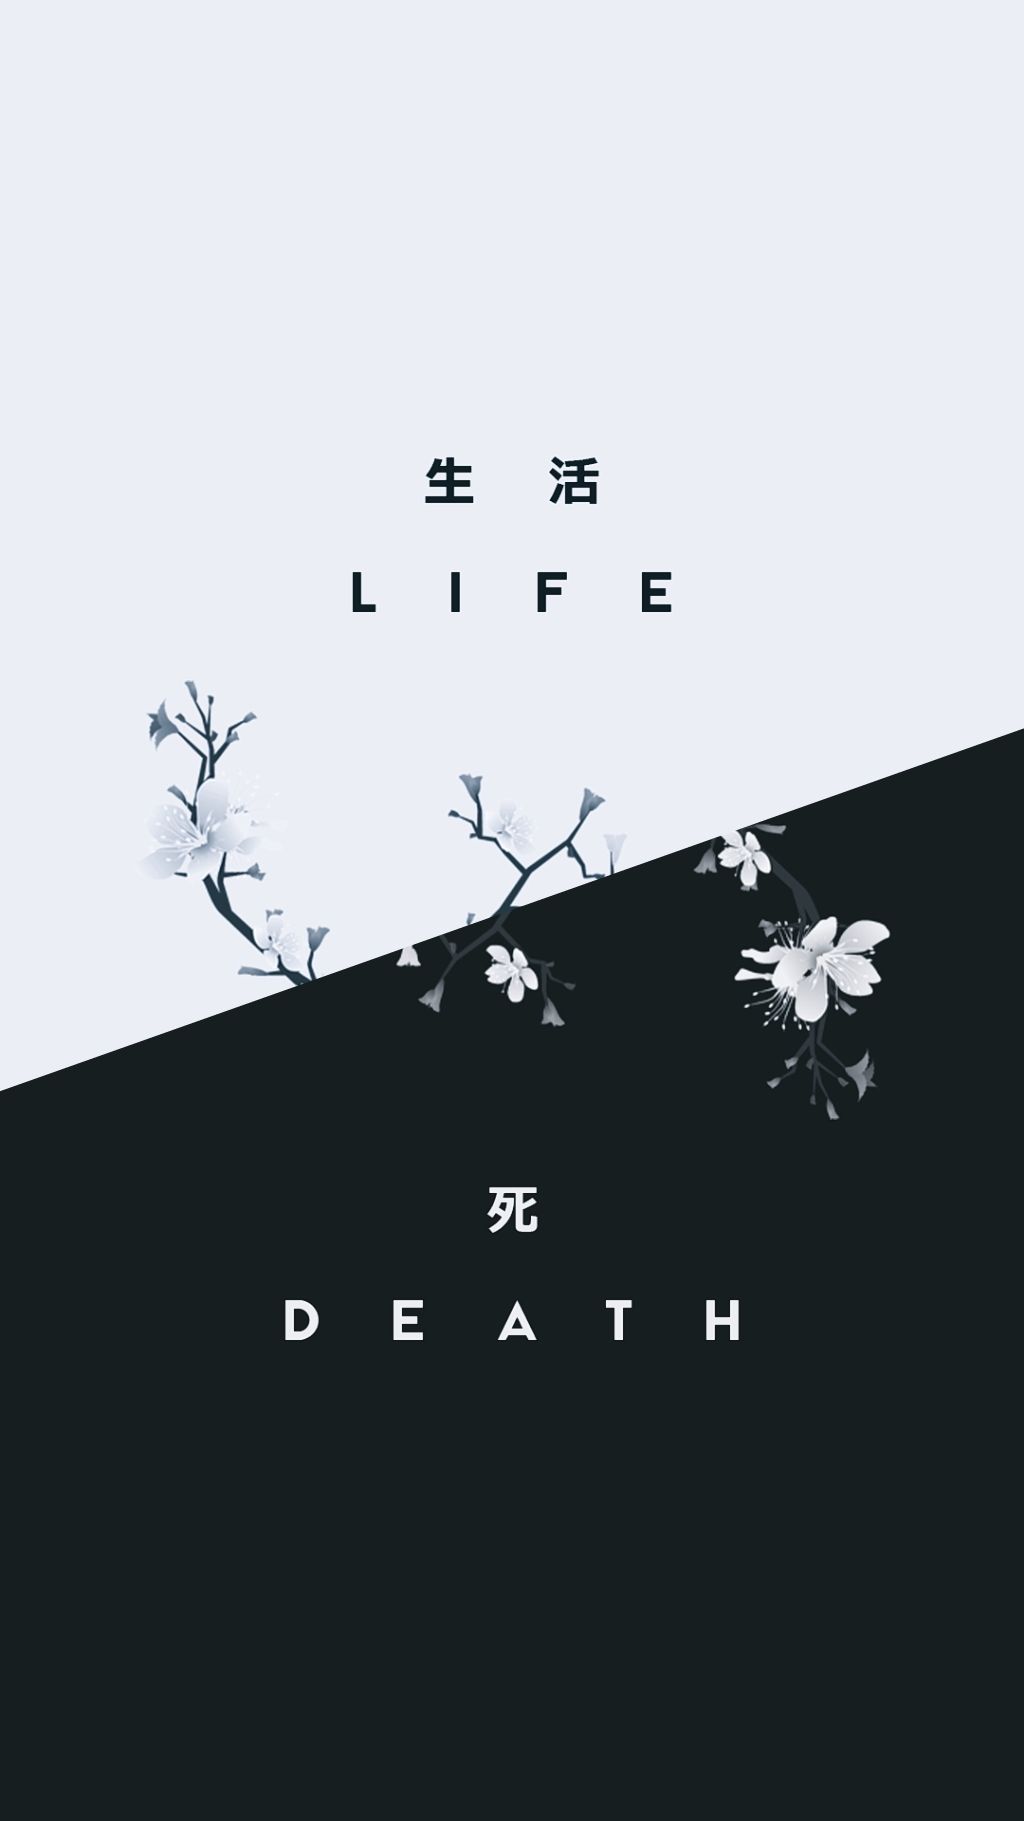 Japanese Death Symbols Wallpapers